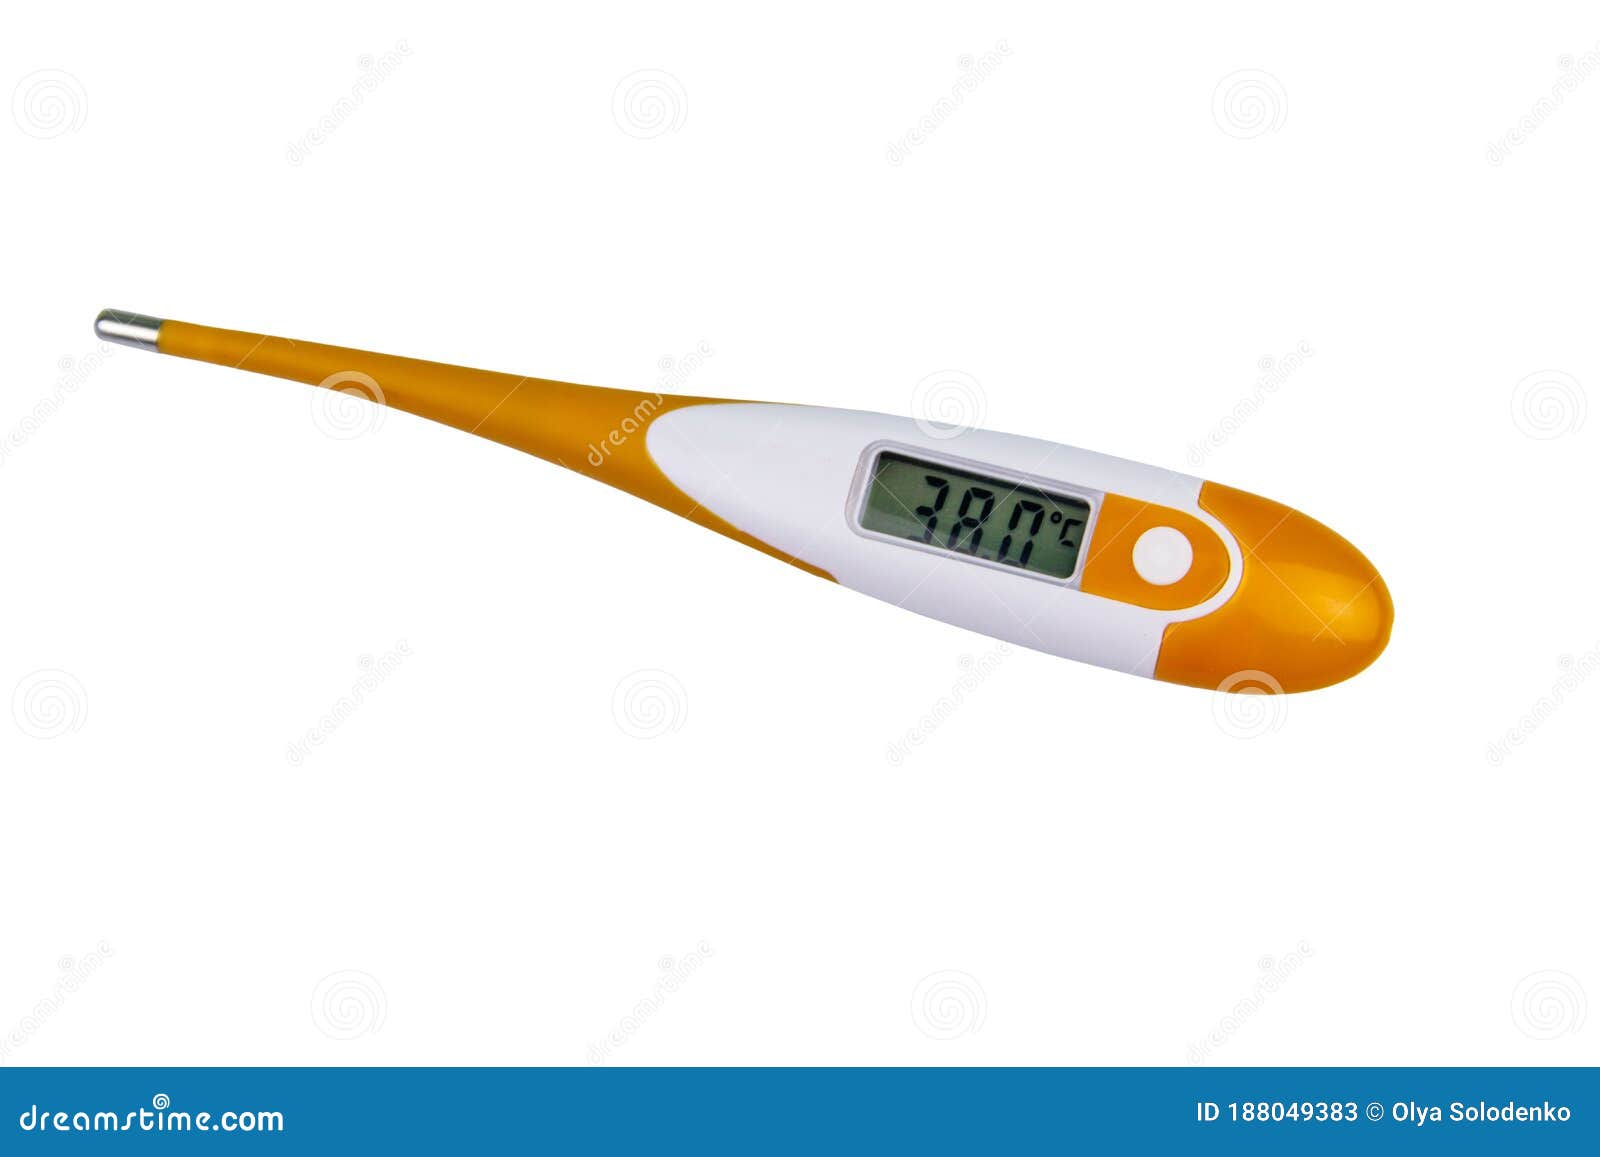 https://thumbs.dreamstime.com/z/digital-medical-thermometer-showing-high-fever-temperature-isolated-white-background-188049383.jpg